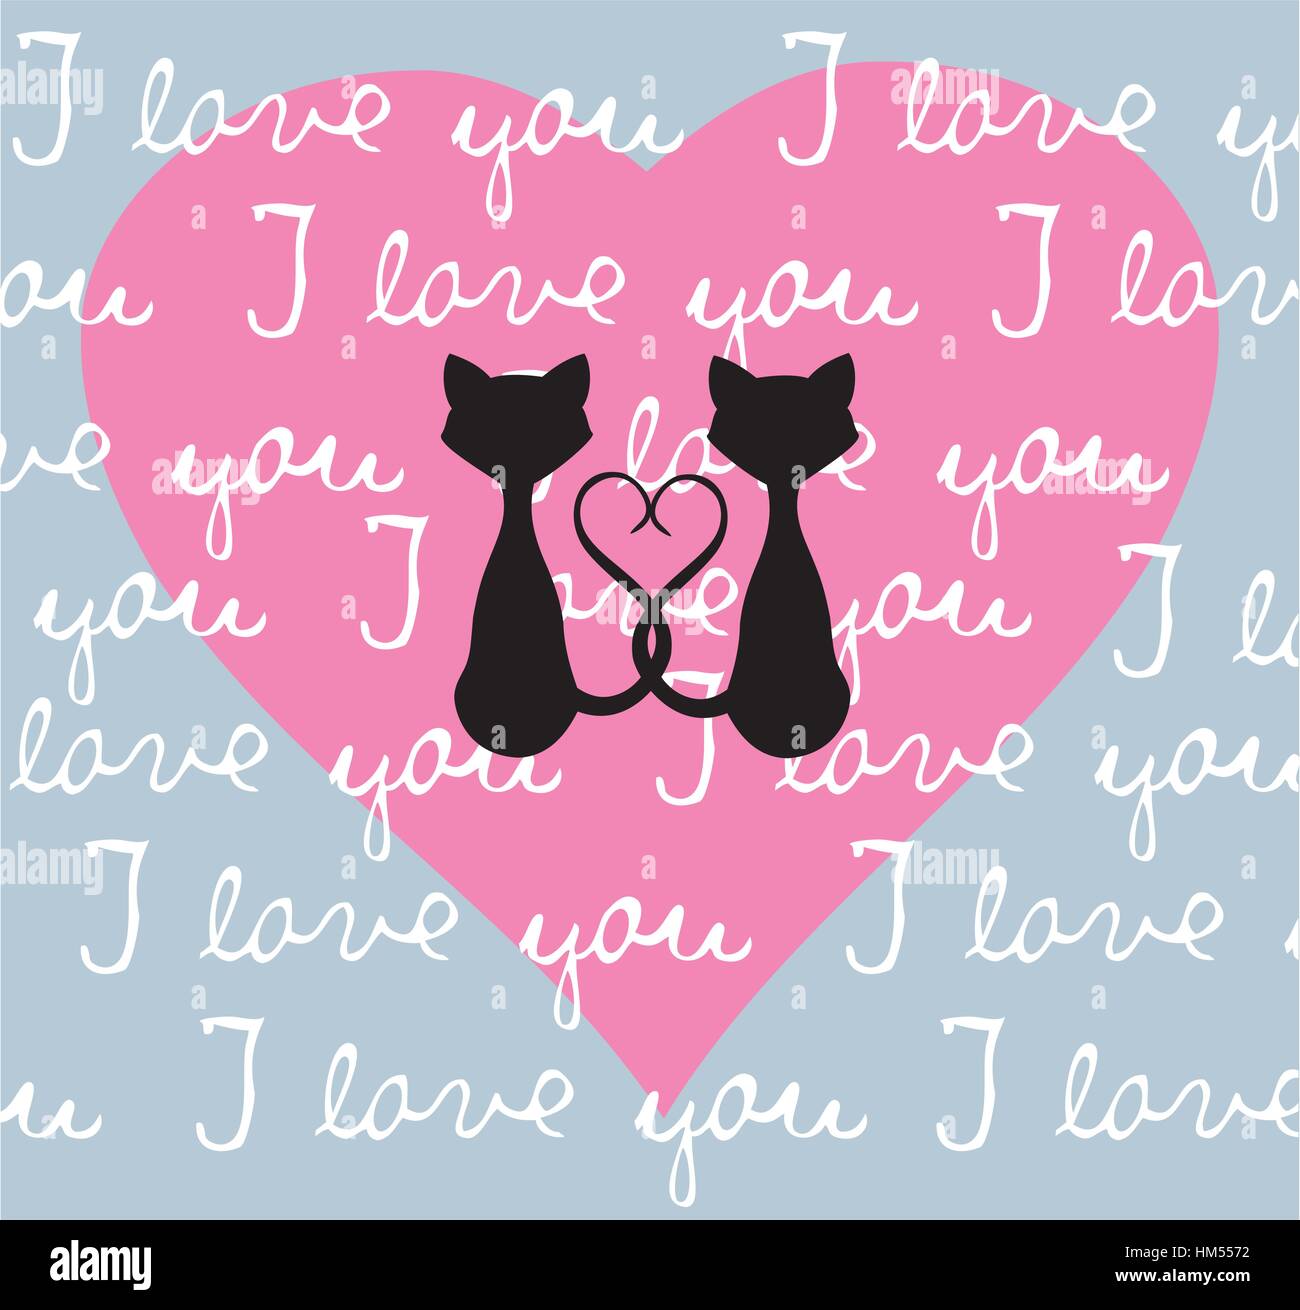 vector illustration of valentine card with cats and hearts Stock Vector